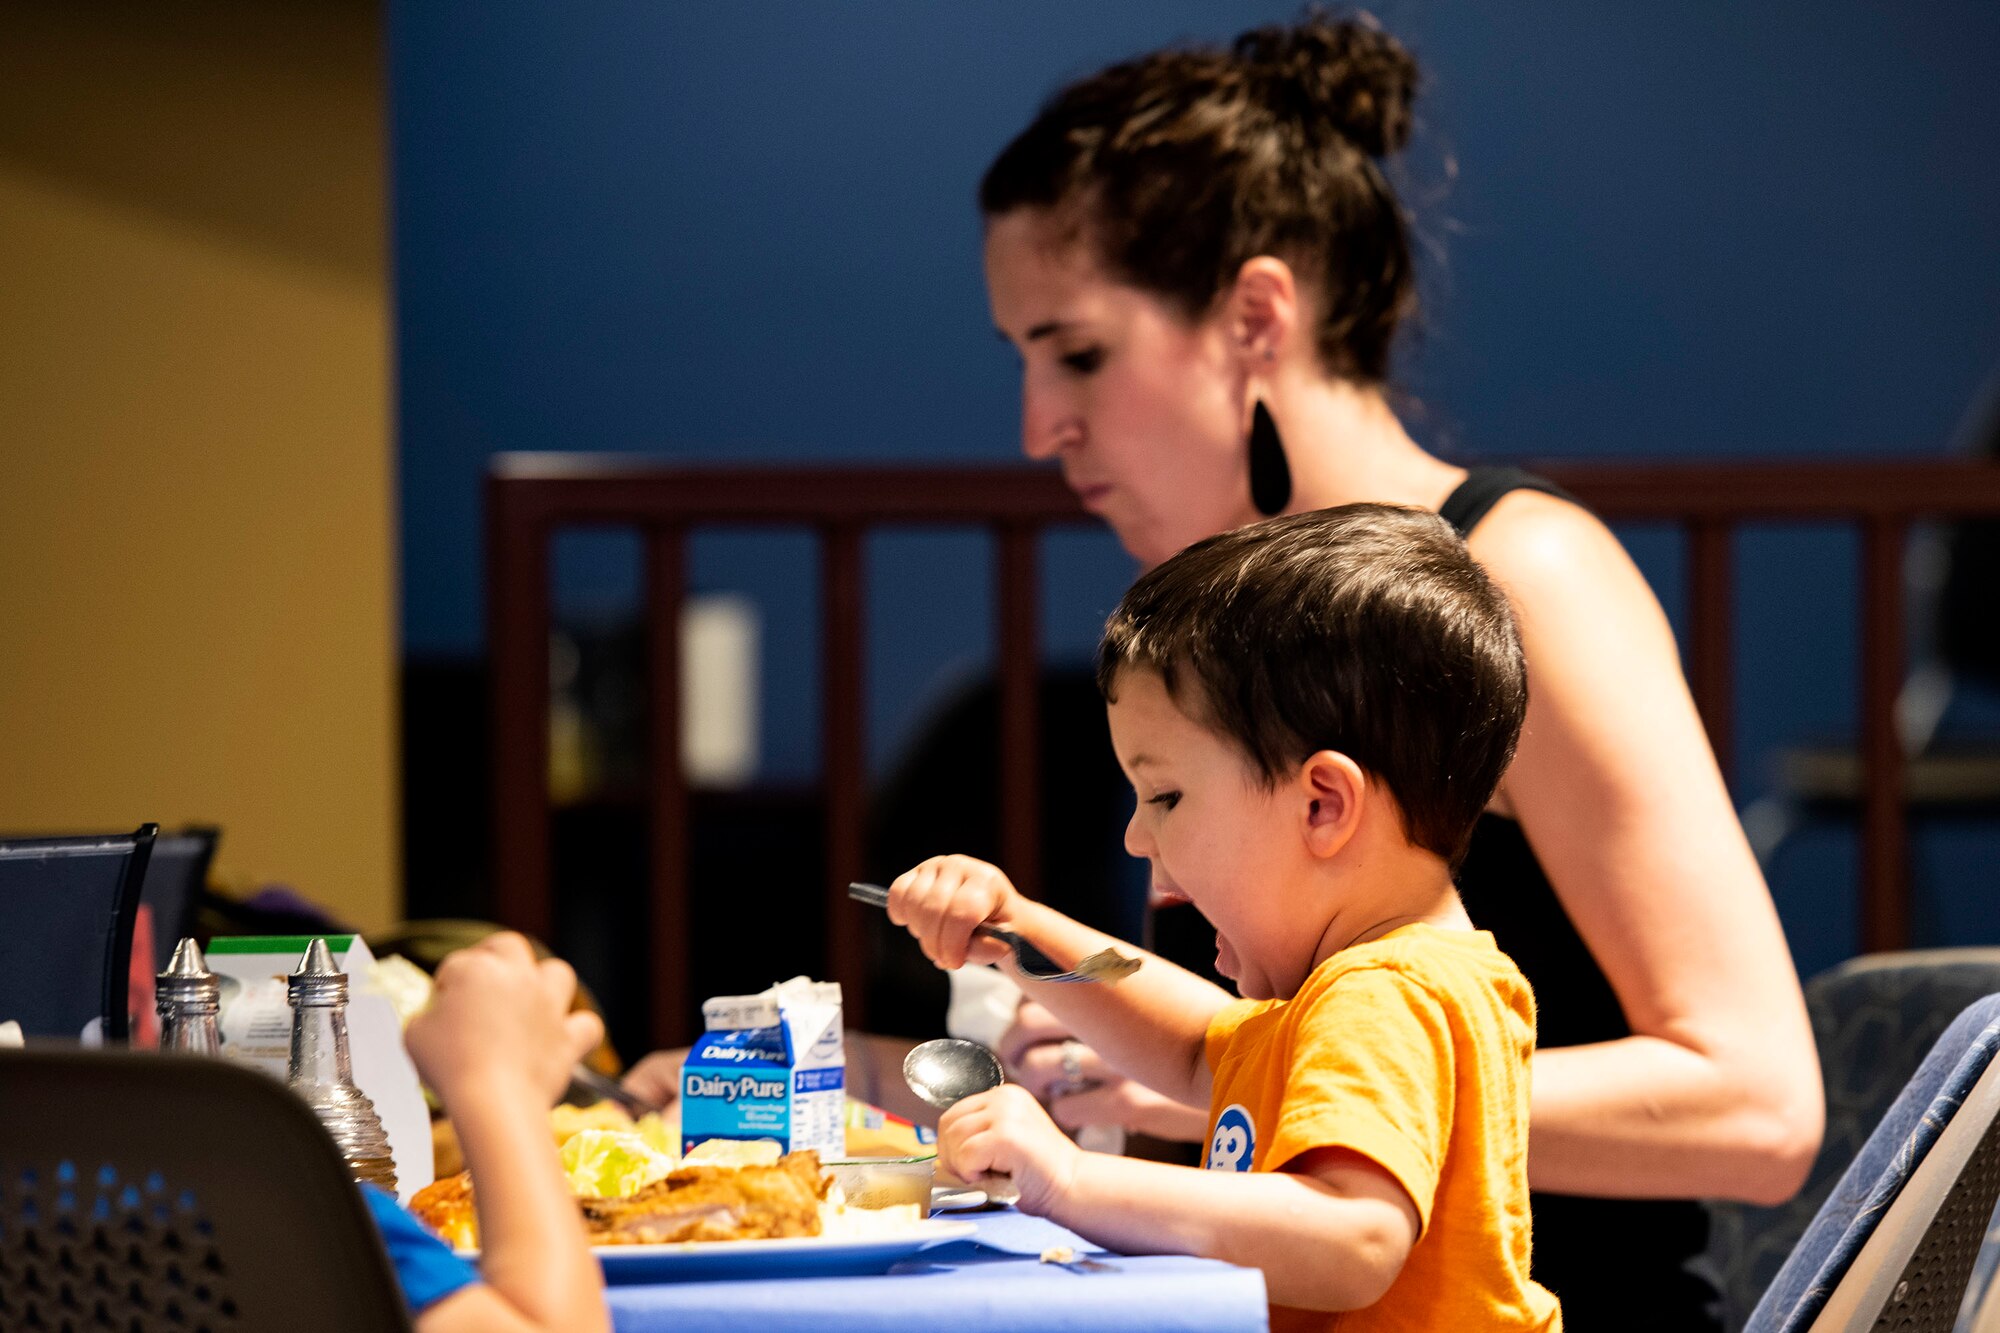 Lauren Barthle, back, military spouse, and her son, Max, eat together during a Deployed Spouses Dinner Sept. 17, 2019, at Moody Air Force Base, Ga. The monthly event is a free dinner at Georgia Pines Dining Facility designed as a ‘thank you’ for each families’ support and sacrifice. The dinner, occurring on every third Tuesday of the month, provides an opportunity for spouses to interact with other families of deployed Airmen, key spouses and unit leadership, as well as provide a break for the spouse while military sponsor is deployed. The next Deployed Spouses Dinner will be Oct. 15. (U.S. Air Force photo by Senior Airman Erick Requadt)